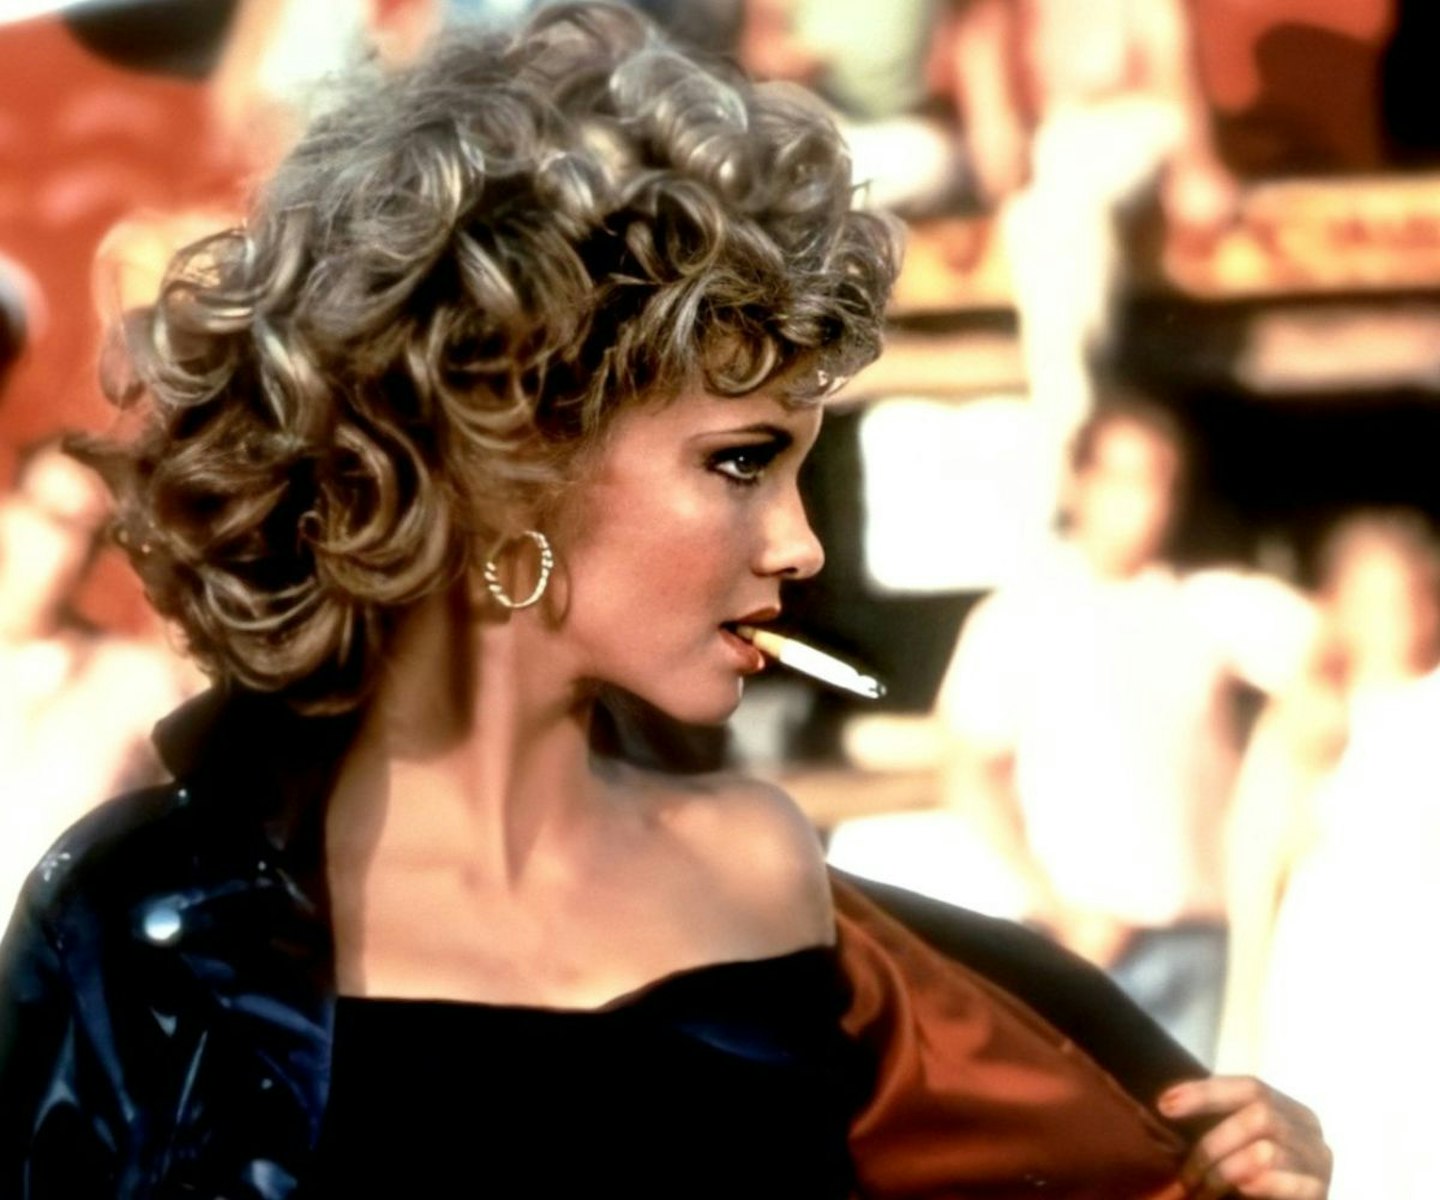 Sandy from Grease